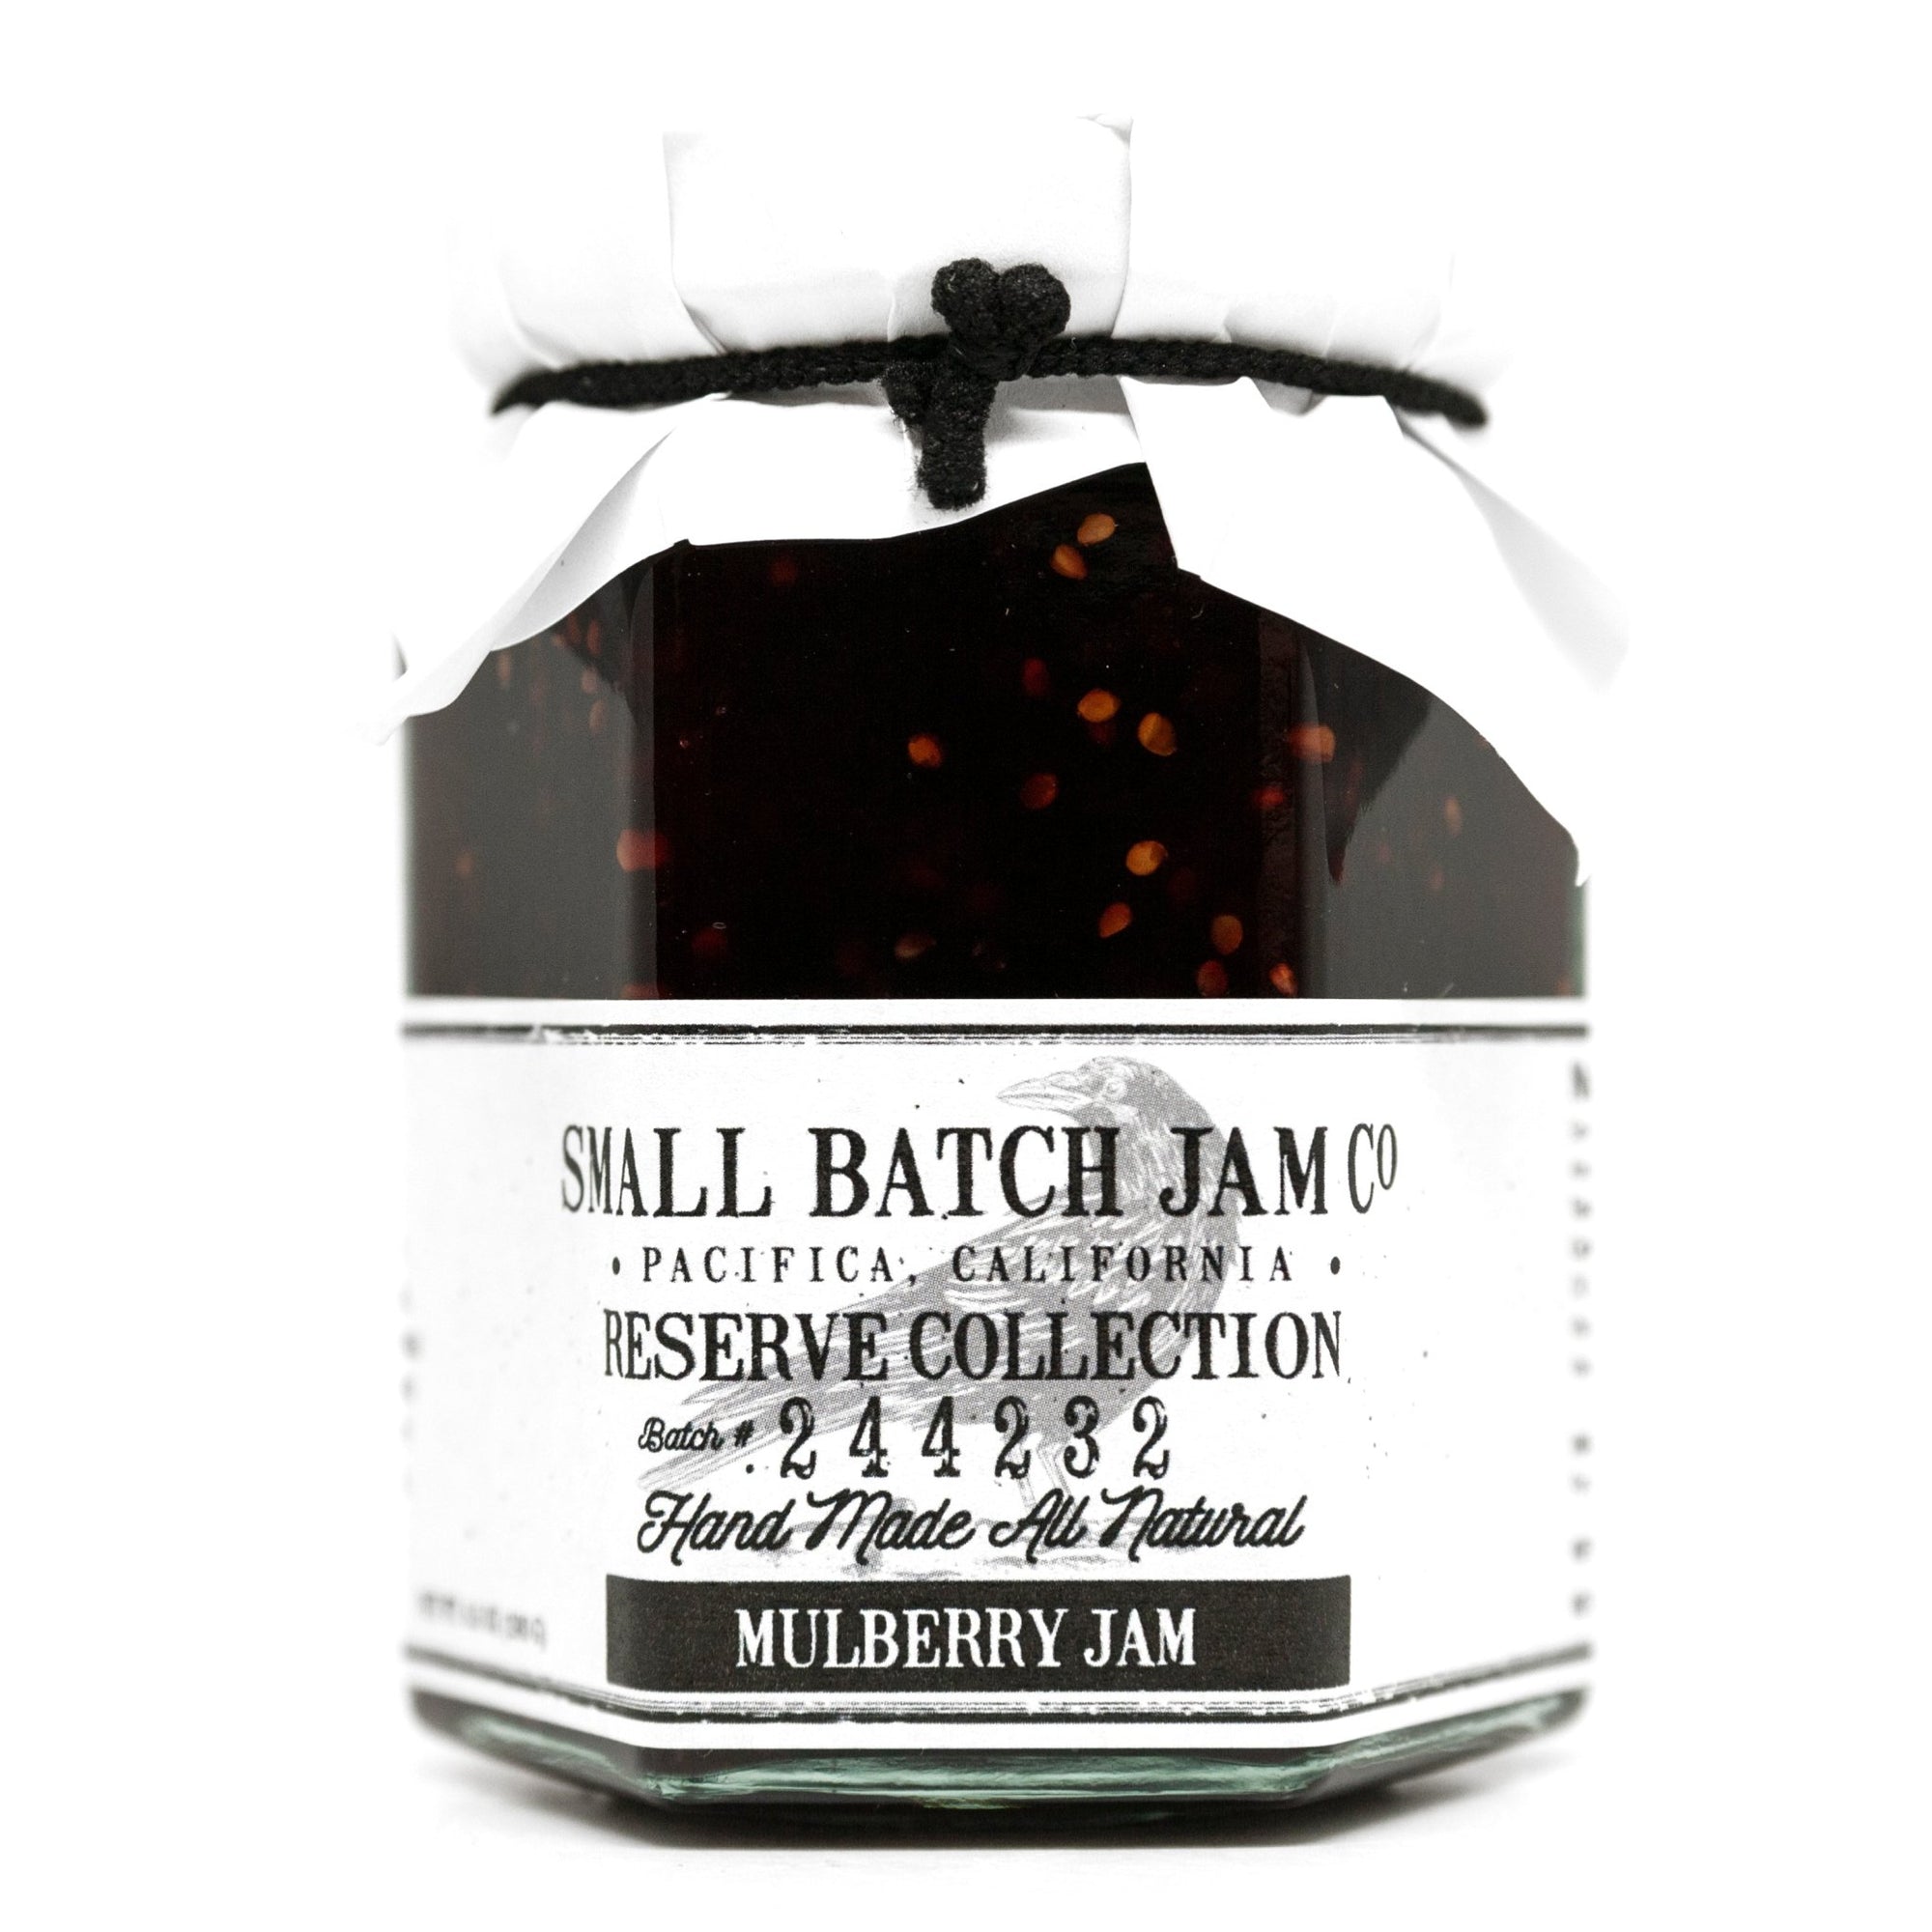 Mulberry Jam - Reserve Collection - Small Batch Jam Co